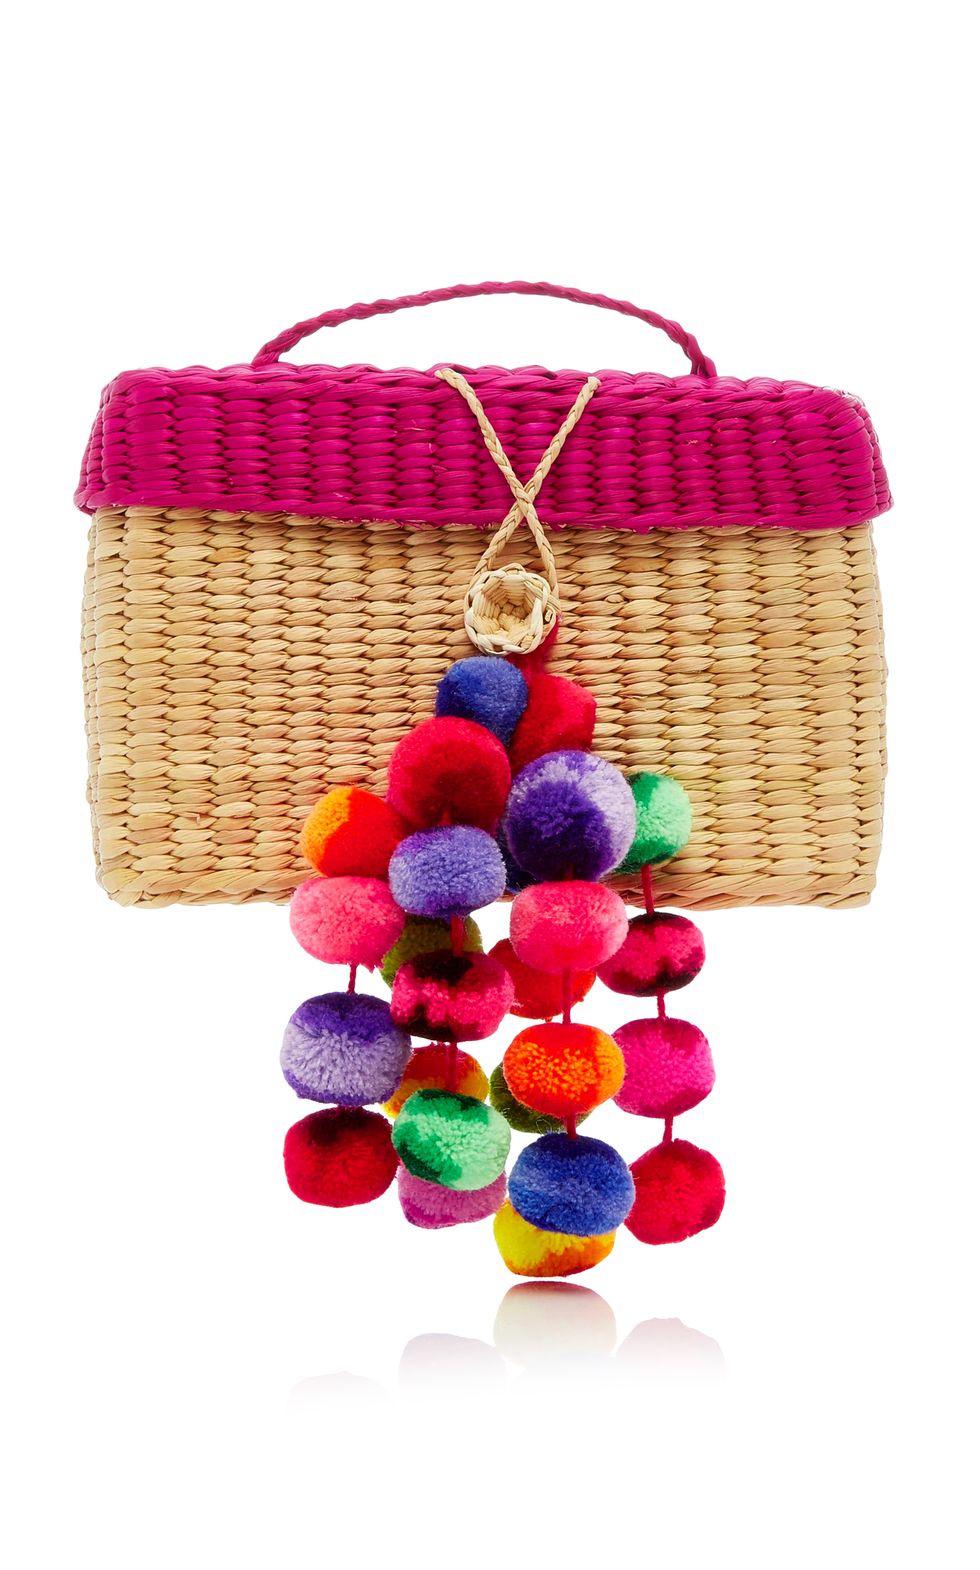 A Baby Straw Bag with Pom Poms to Bring on Your Next Vacation